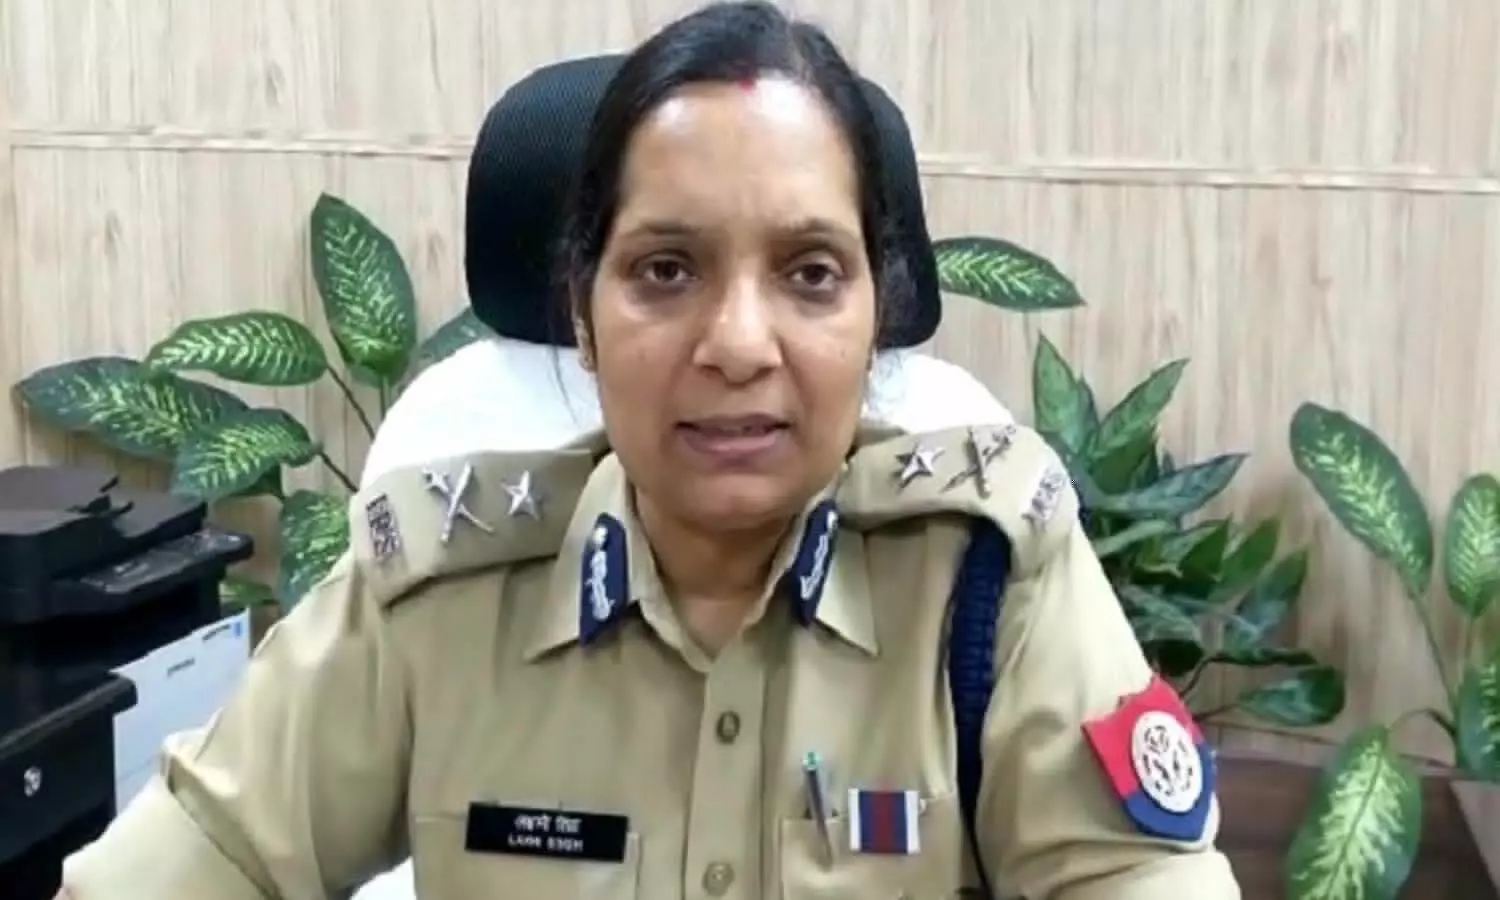 Noidas new police commissioner Laxmi Singh, with whom criminals tremble